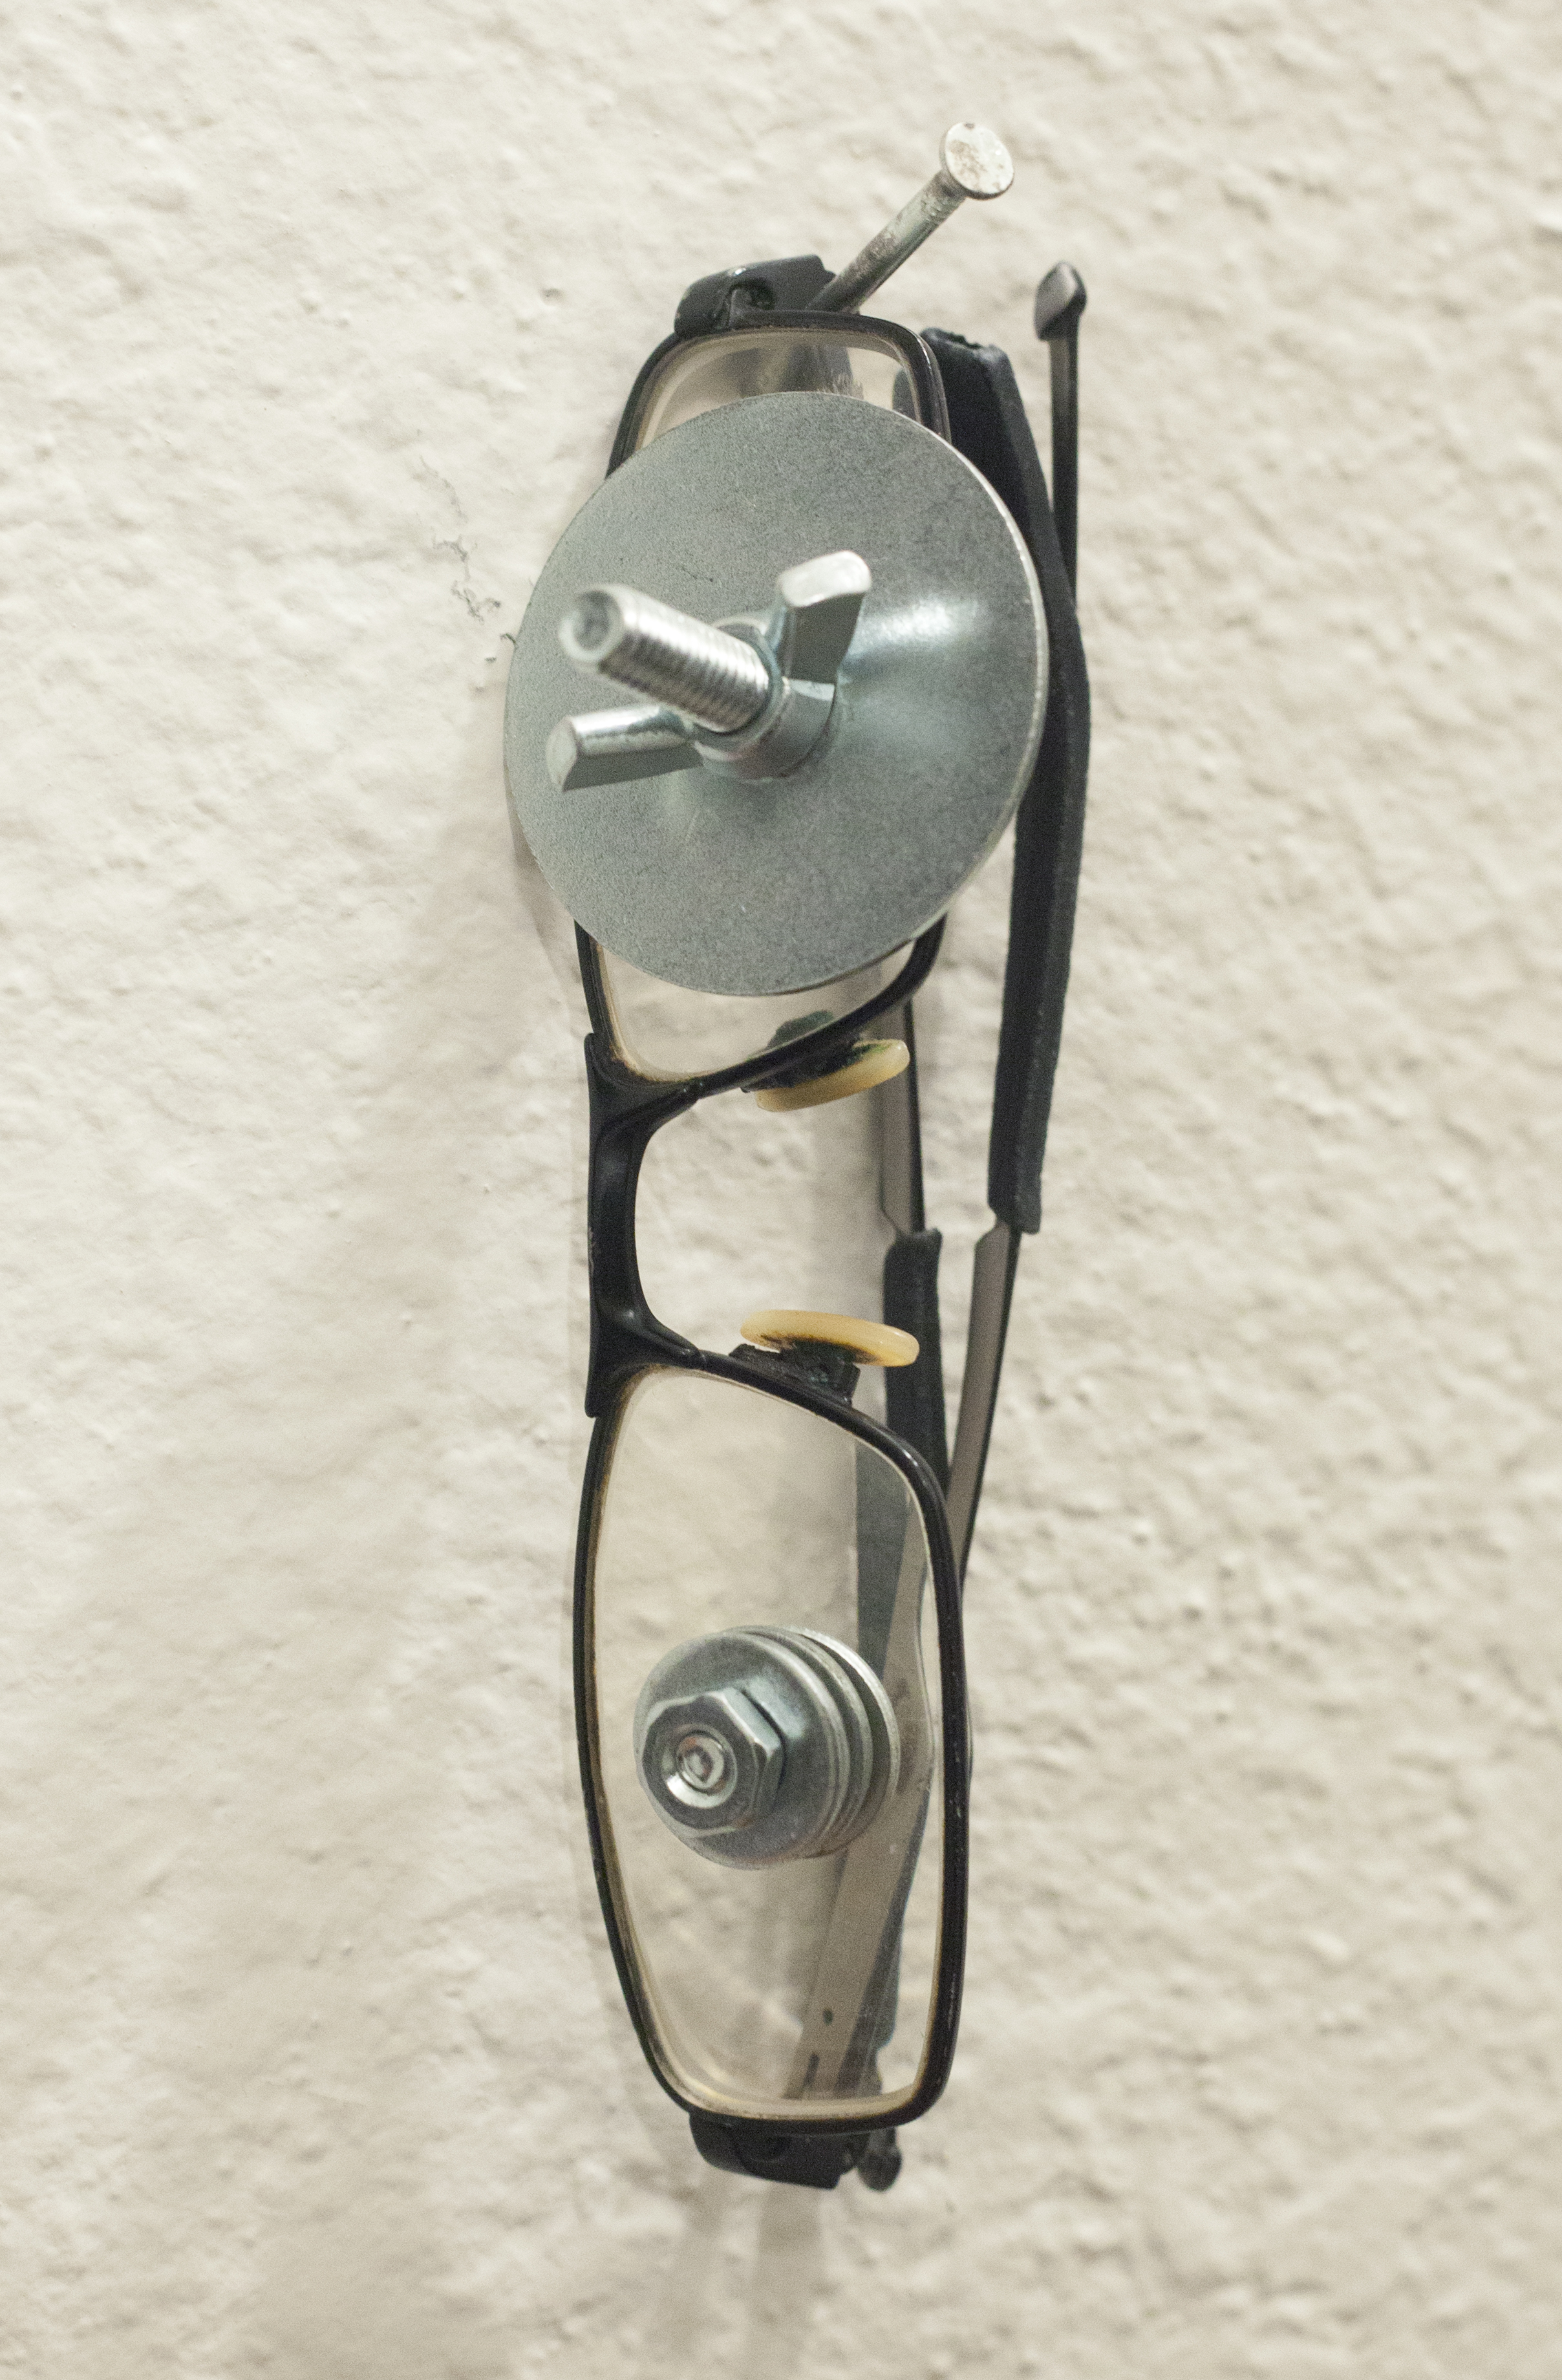 A pair of glasses with screws and washers through the lenses hung on a white wall